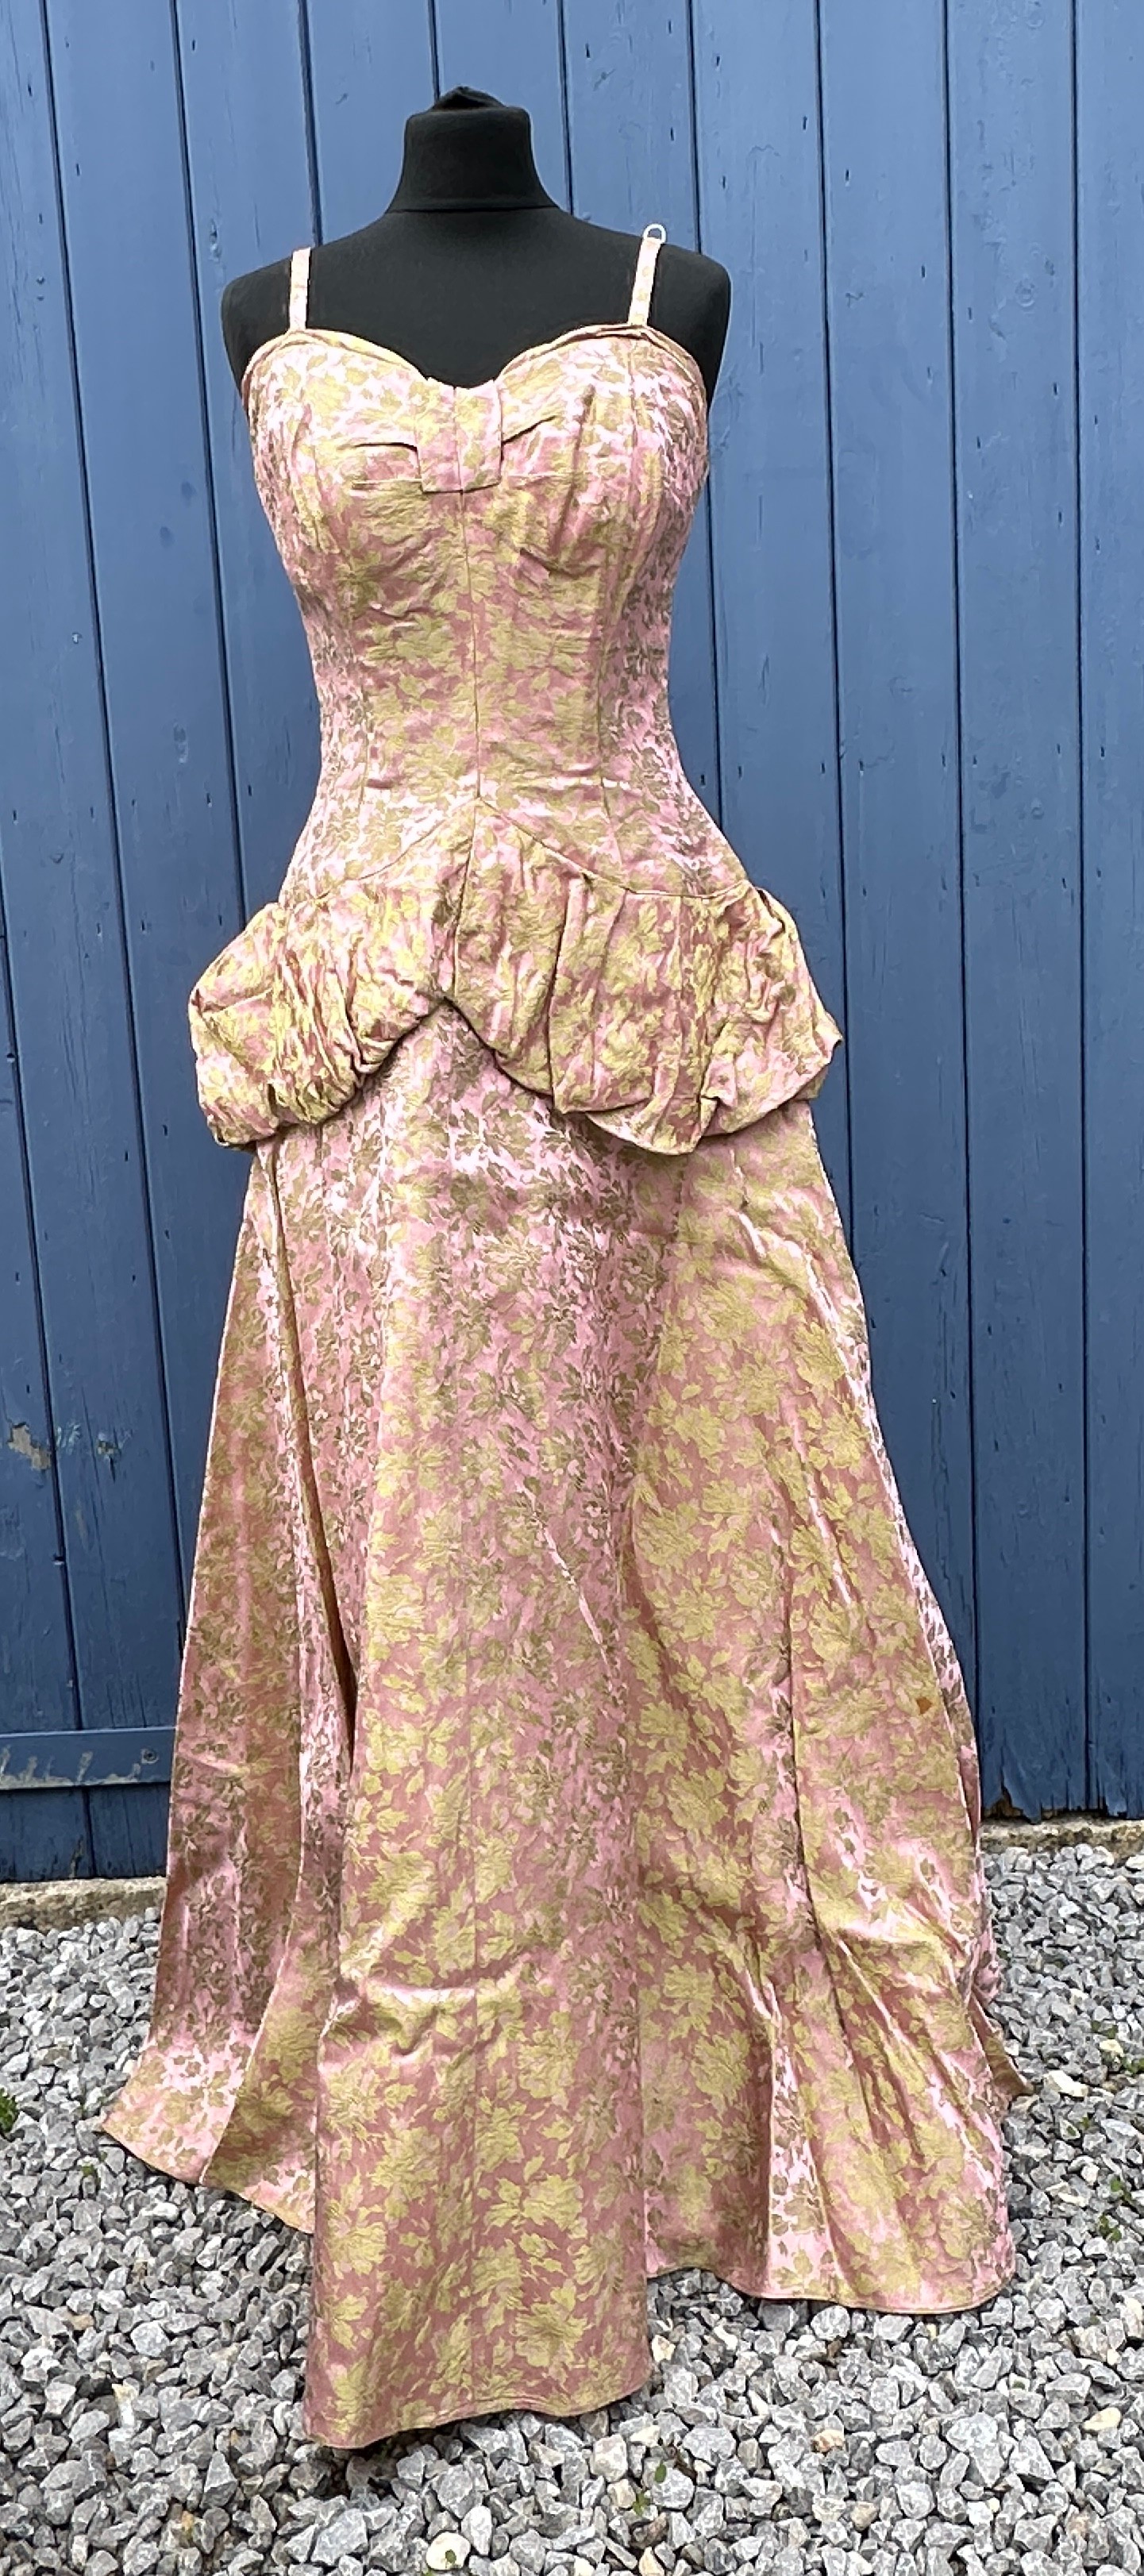 A 1950's Chafil, London full length pink and green demask dress, sleeveless with boned bodice, lined - Image 2 of 9